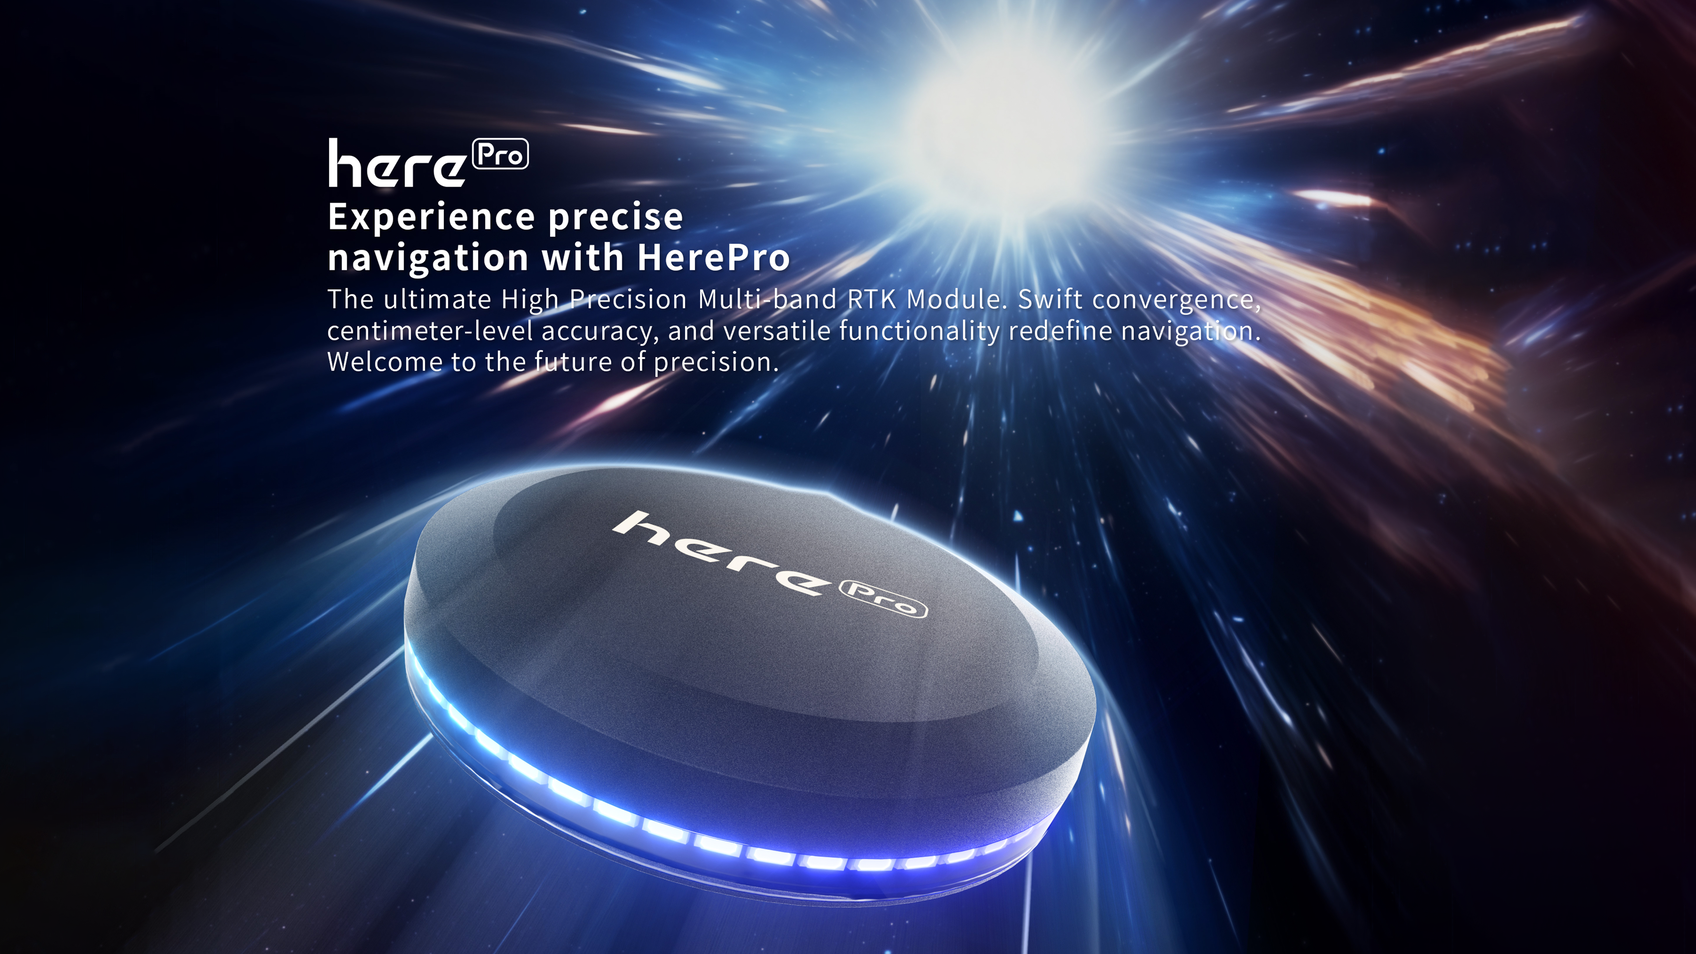 here Pro Experience precise navigation with HerePro